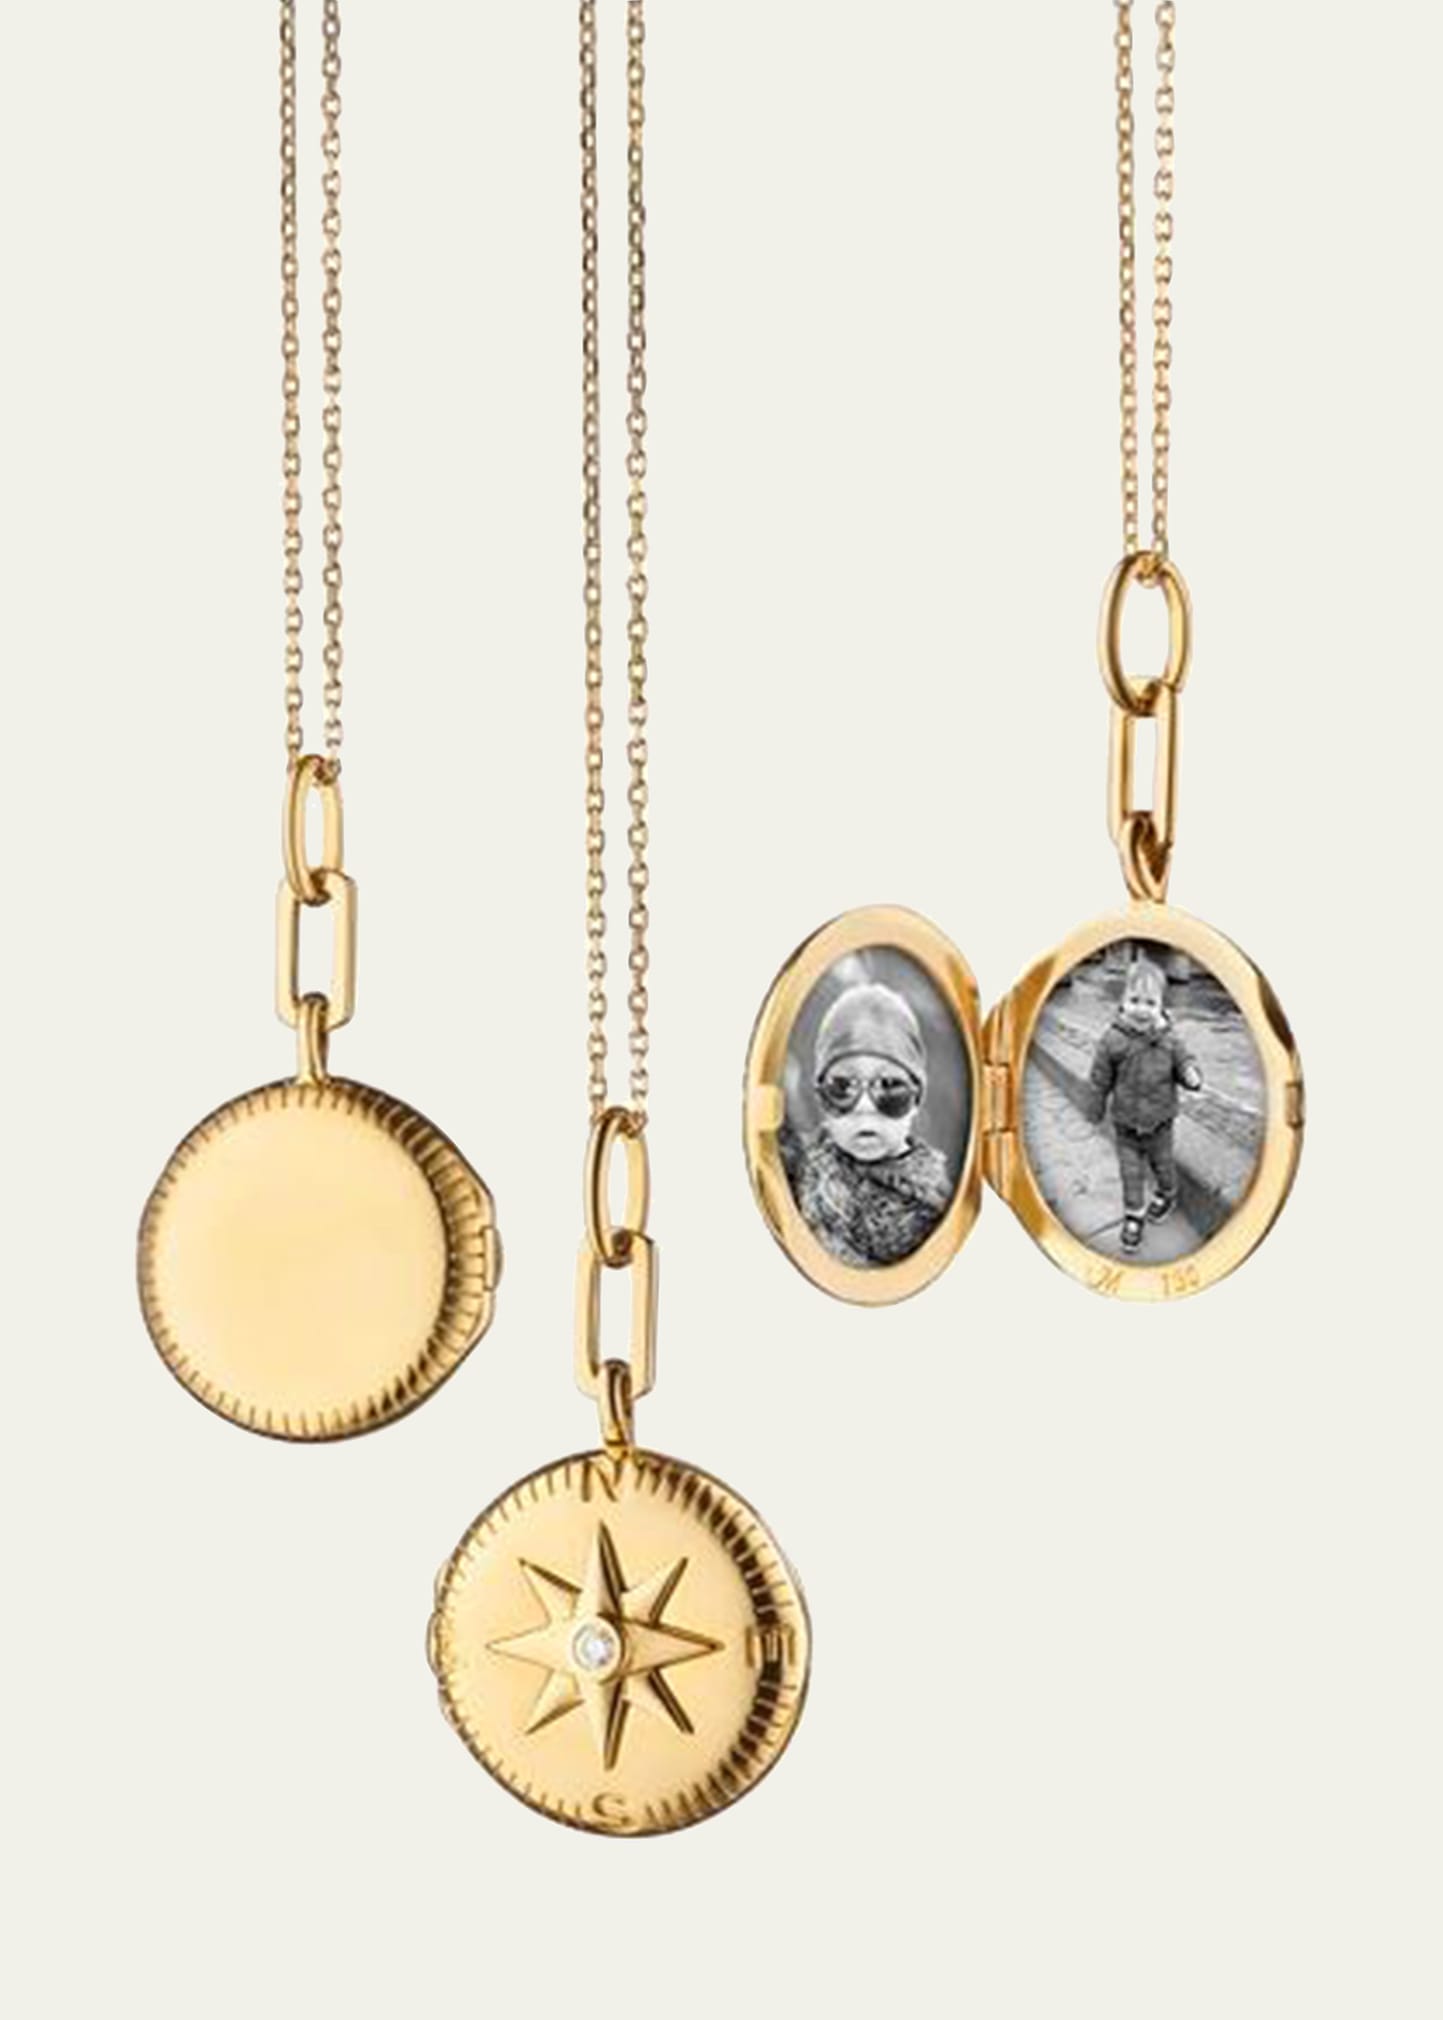 Gold Round Compass Locket w/ Center White Diamond On A 17 Diamond Cut Disappearing Chain w/ Loop At 16